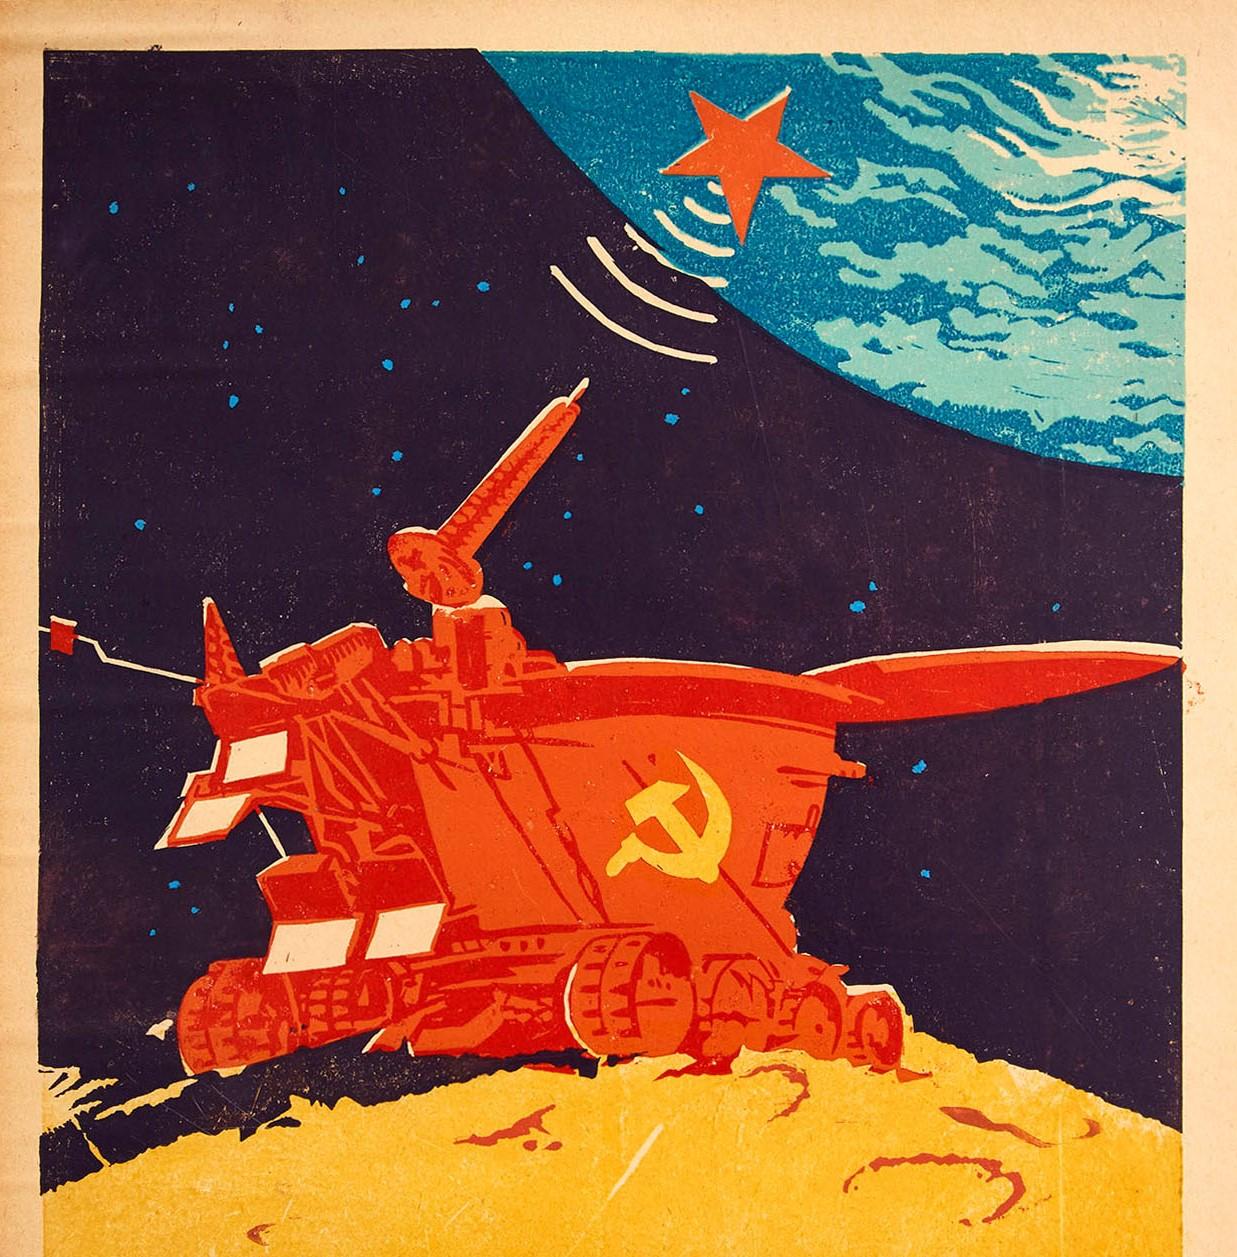 Original vintage Soviet propaganda poster - In the Name of Peace and Progress For the Glory of Our Motherland! - featuring a great design depicting a Lunokhod / Moonwalker rover on the moon with its helical antenna sending a signal to a red star on